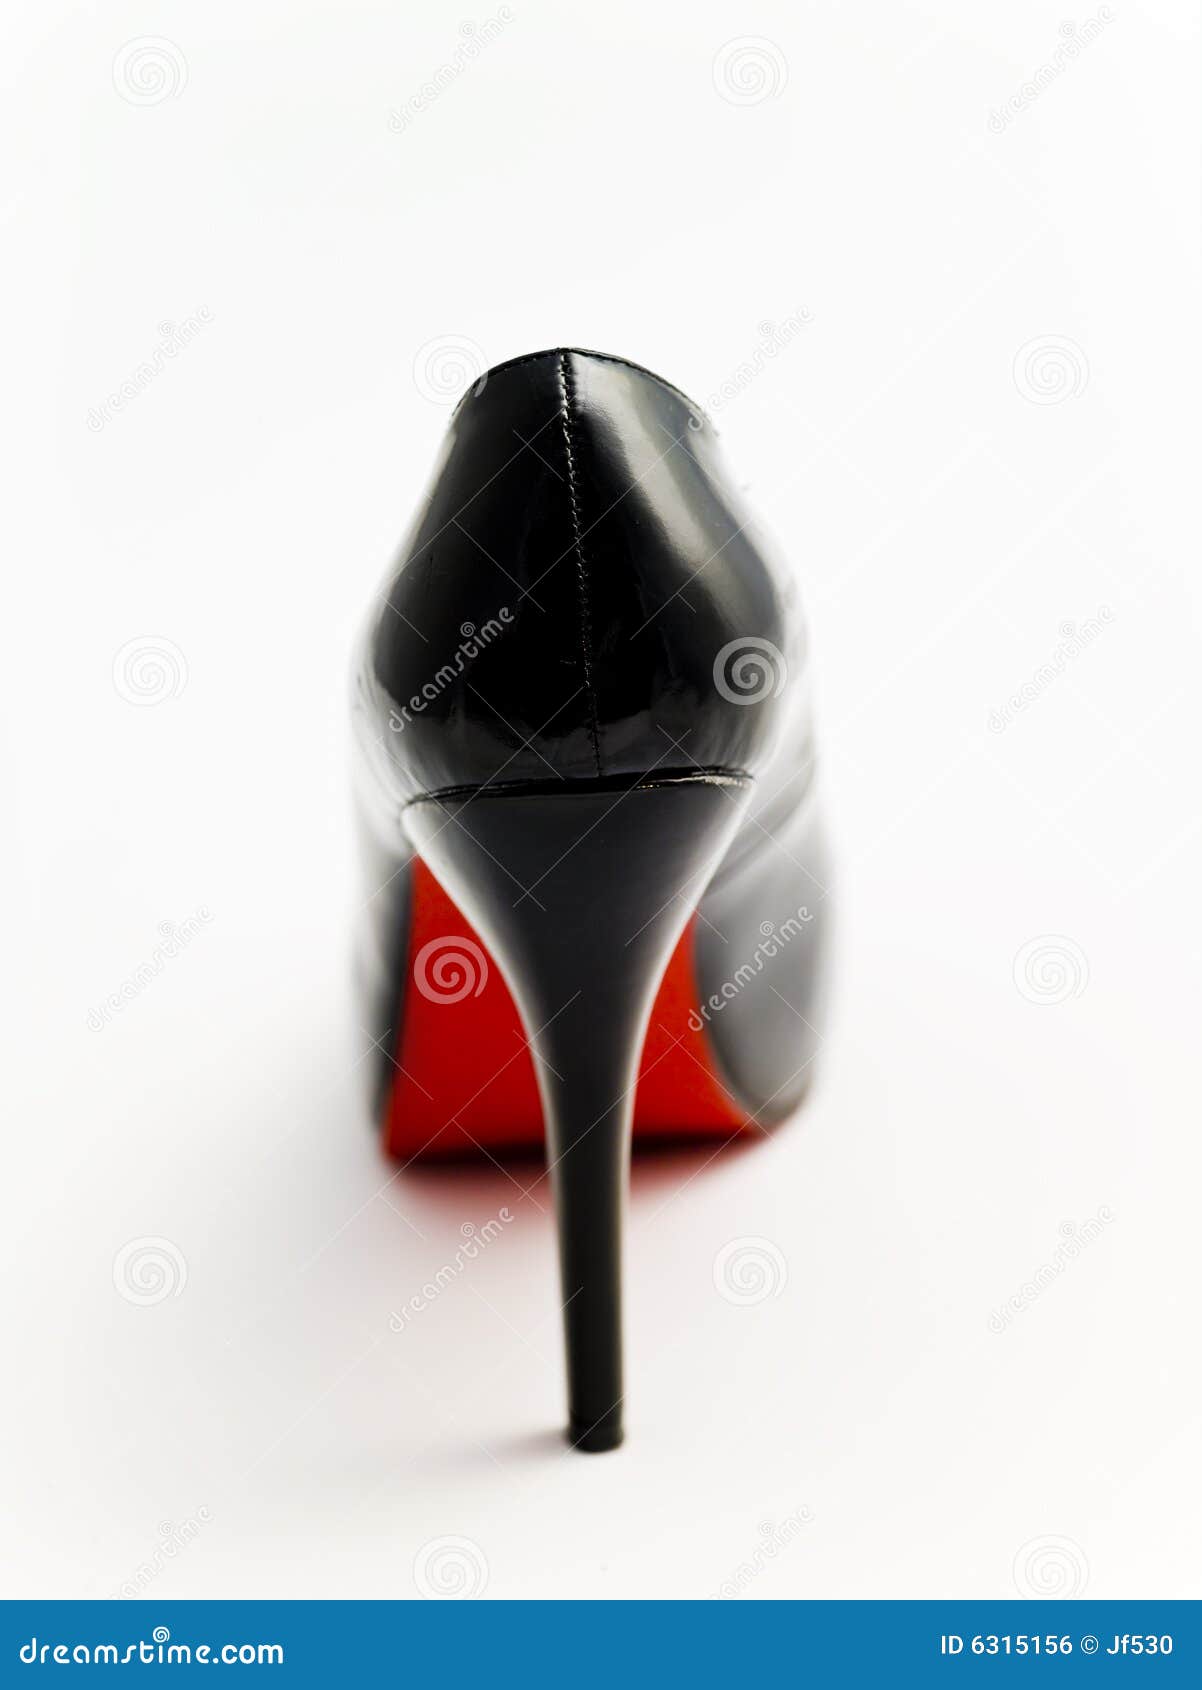 White Shoes With A Red Sole On The Foot Of The Bed, Close-up Stock Photo,  Picture and Royalty Free Image. Image 126064281.